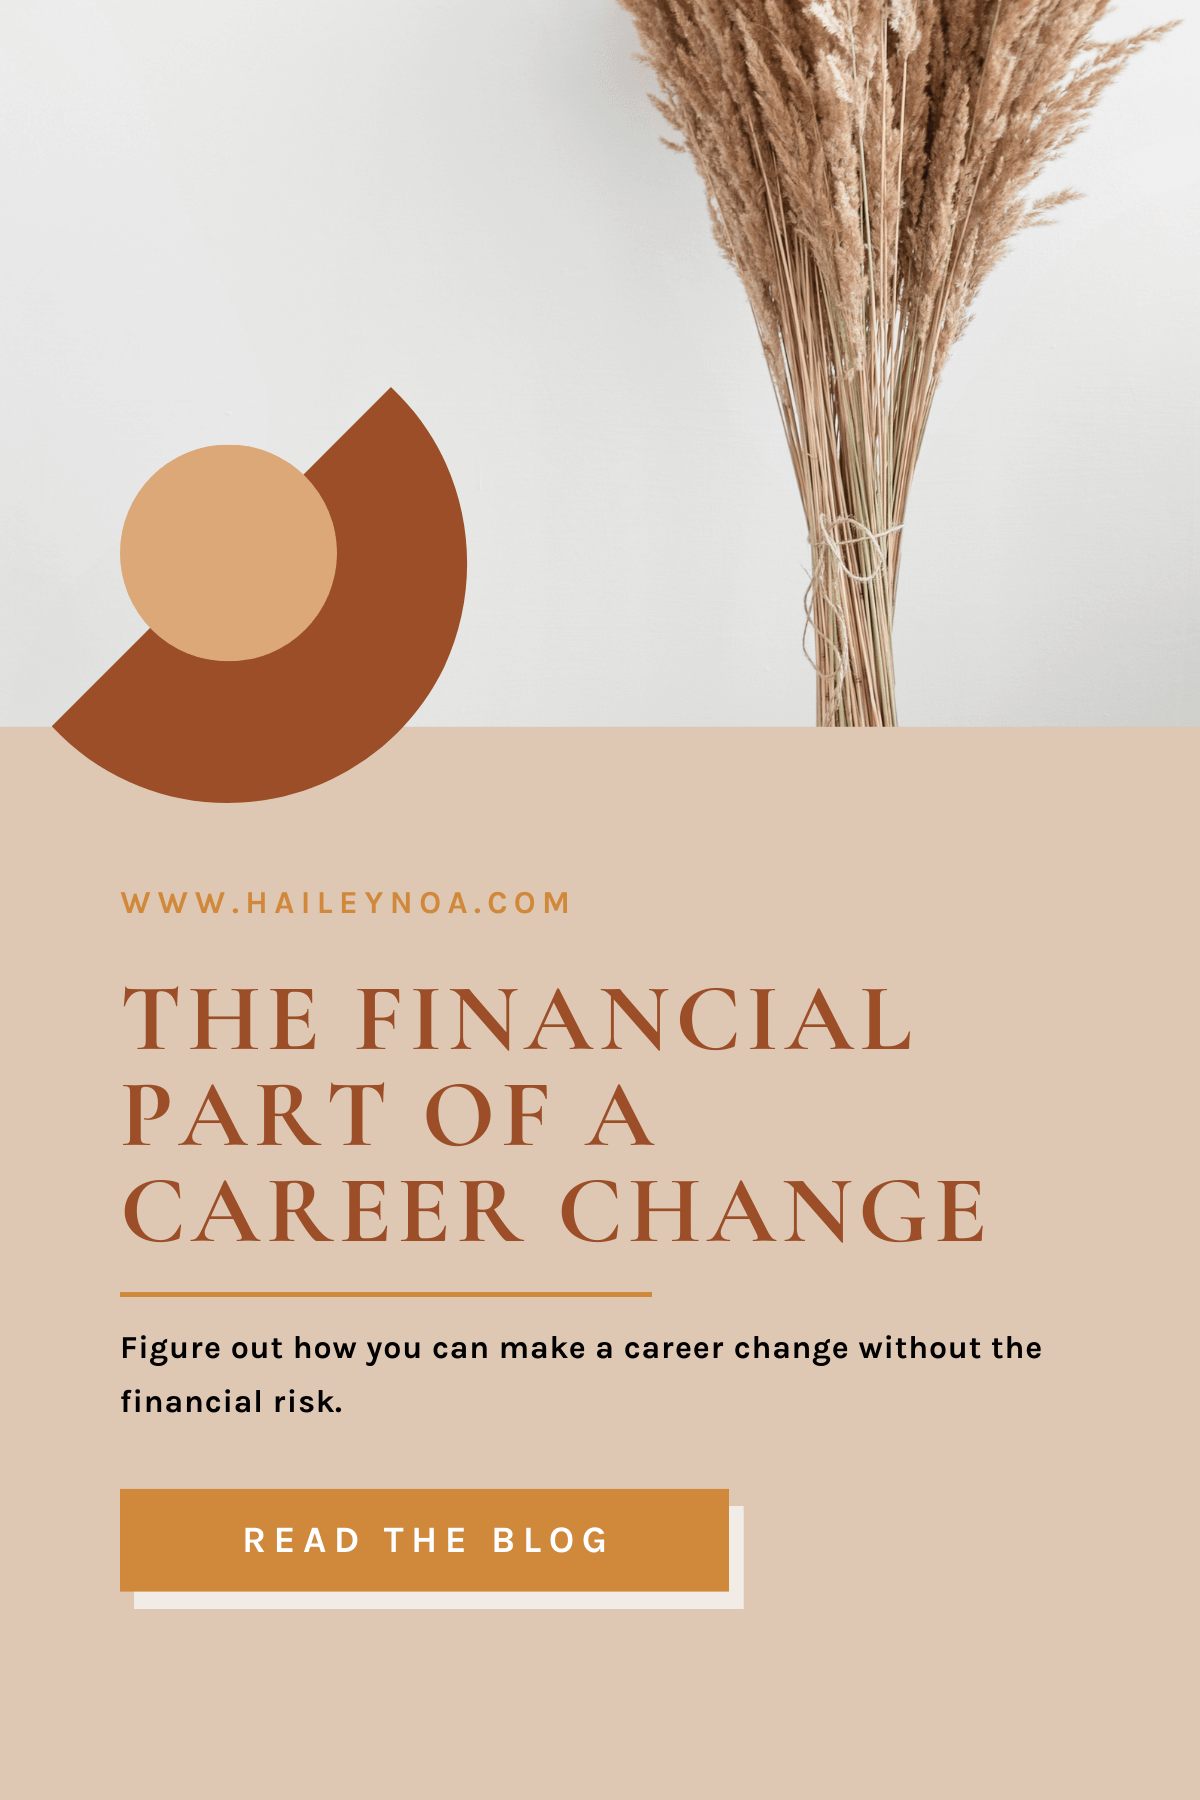 The financial part of a career change